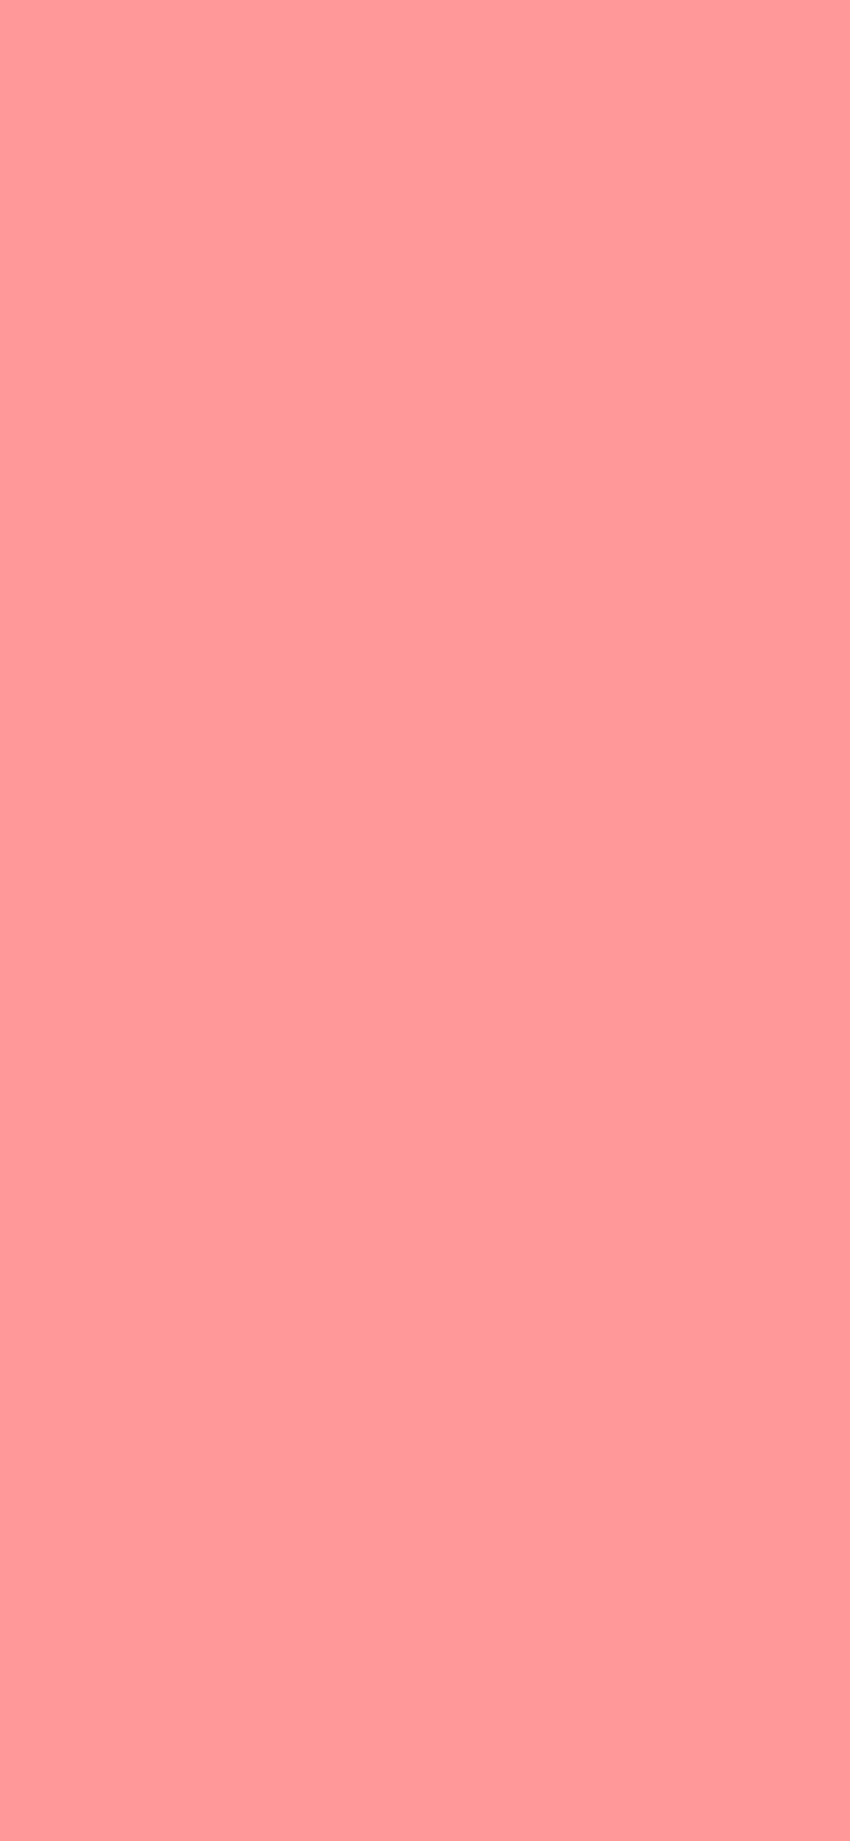 1125x2436 Light Salmon Pink Solid Color Backgrounds, solid iphone HD phone wallpaper